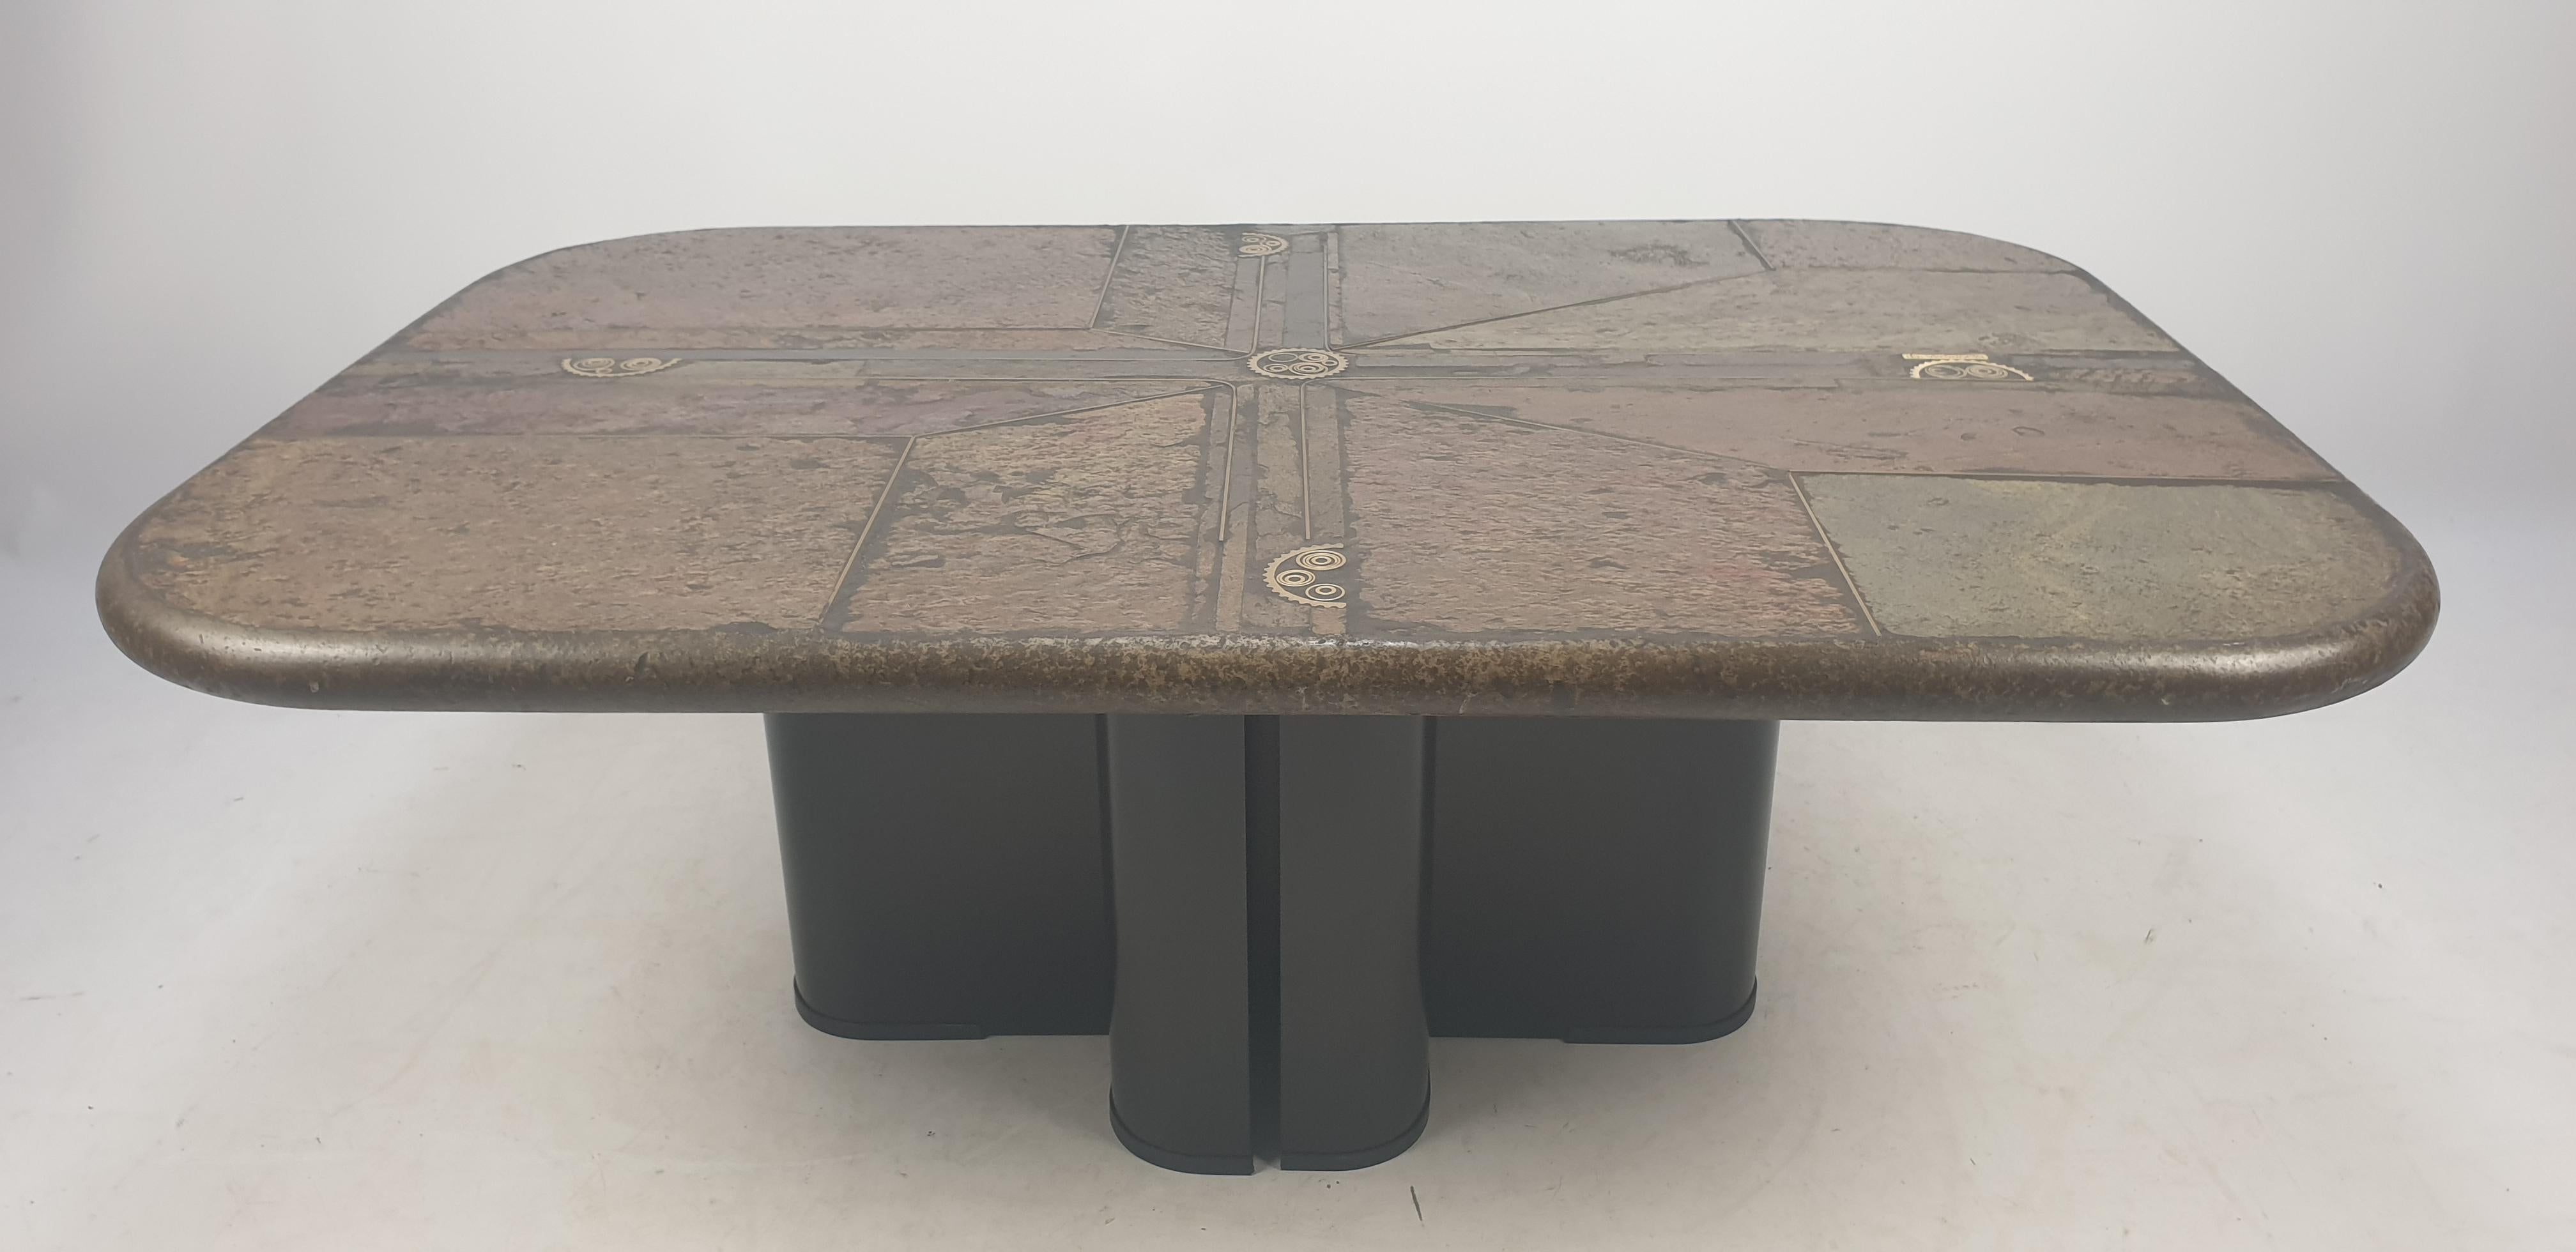 This eye-catching coffee table was designed and marked by M. Kingma '91. This very nice table has a concrete blade inlaid with a mosaic of stone (in different colors and textures) and brass. The base can be used in various positions and is made of